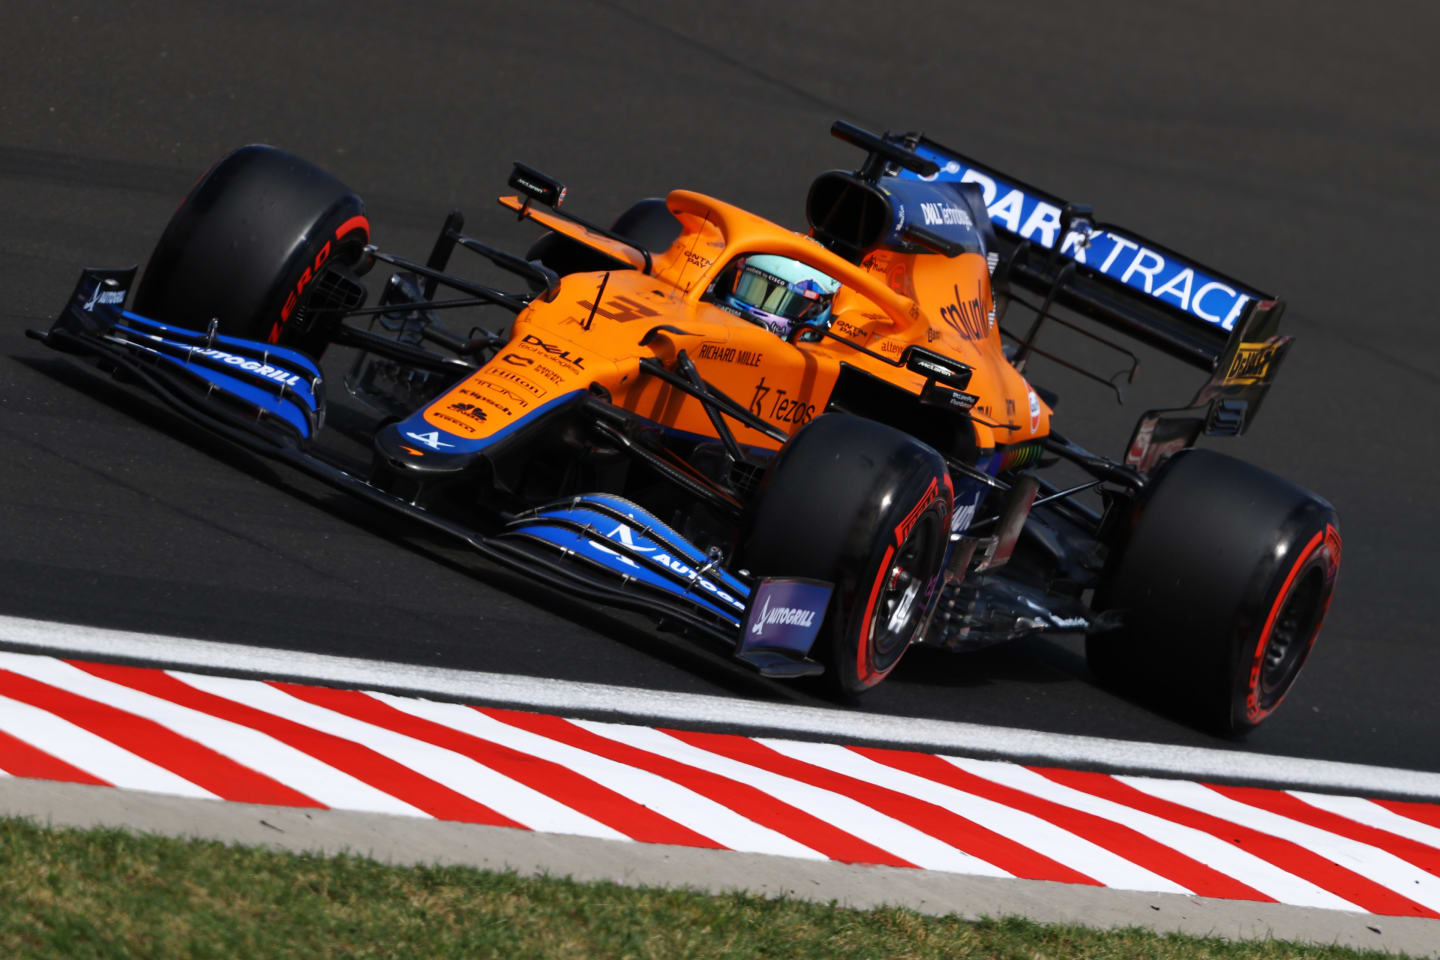 BUDAPEST, HUNGARY - JULY 31: Daniel Ricciardo of Australia driving the (3) McLaren F1 Team MCL35M Mercedes during final practice ahead of the F1 Grand Prix of Hungary at Hungaroring on July 31, 2021 in Budapest, Hungary. (Photo by Bryn Lennon/Getty Images)